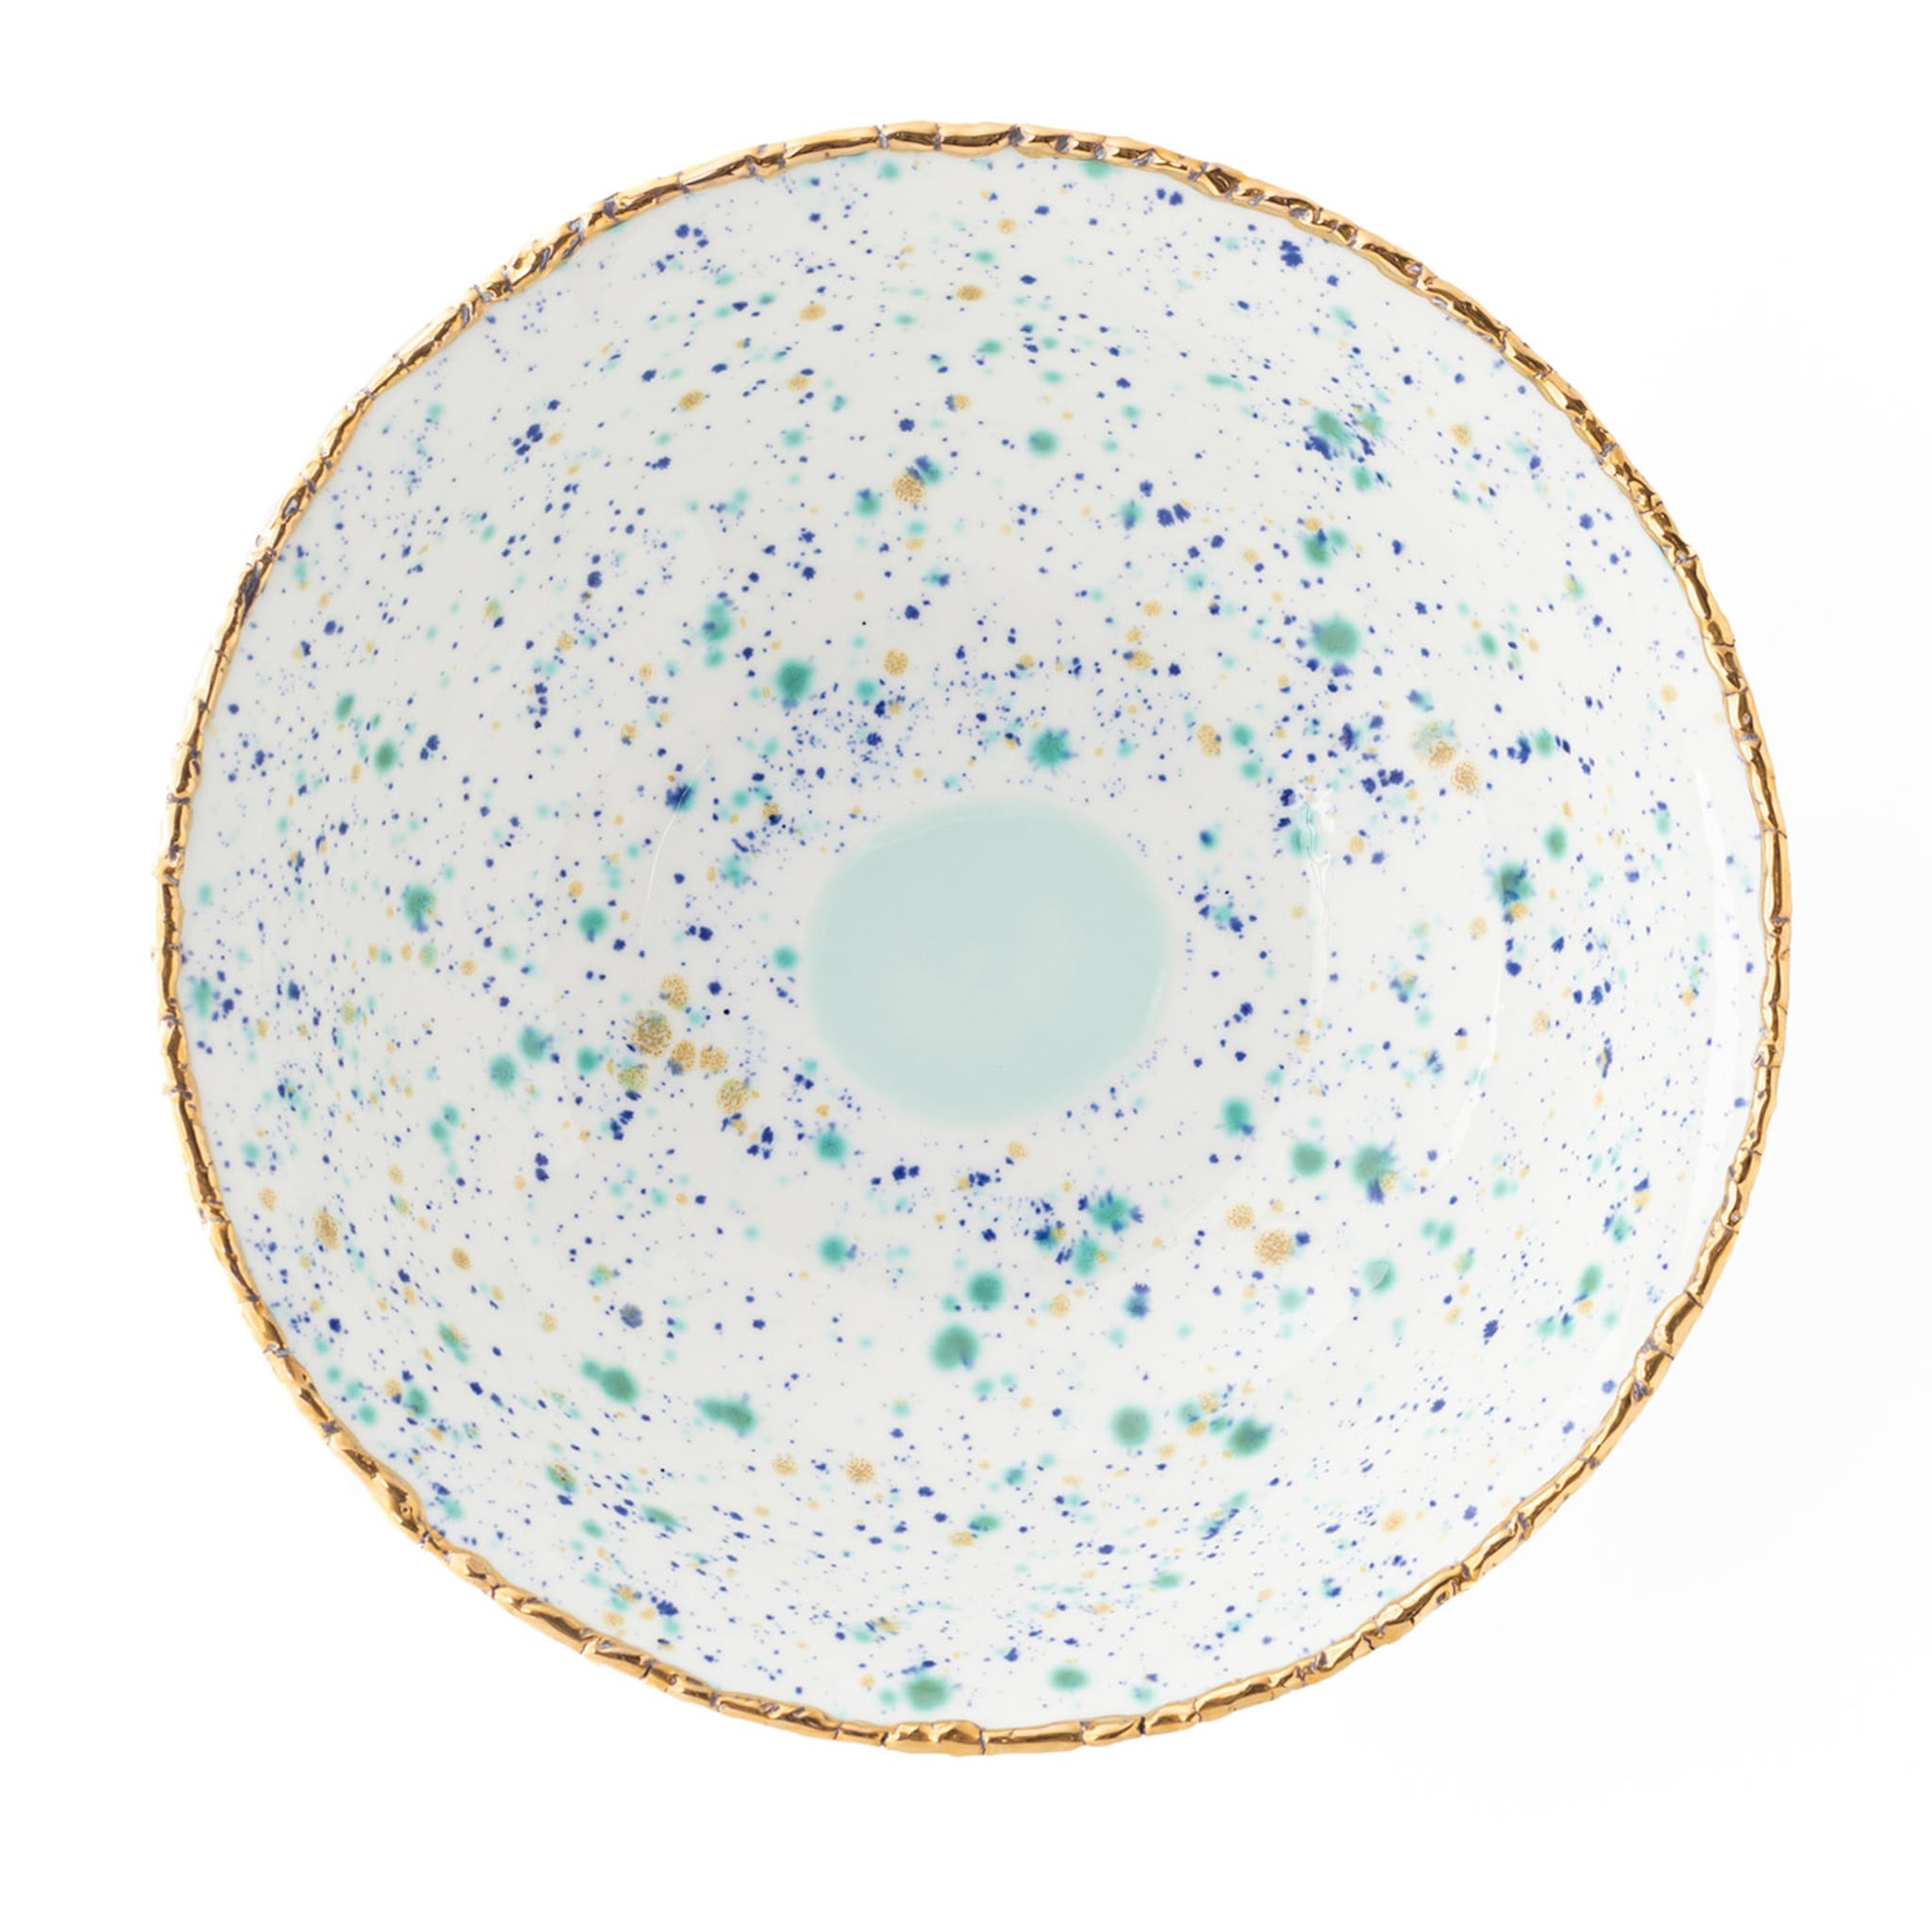 Blue Marble Large Salad Bowl with Crackled Rim - Alternative view 1